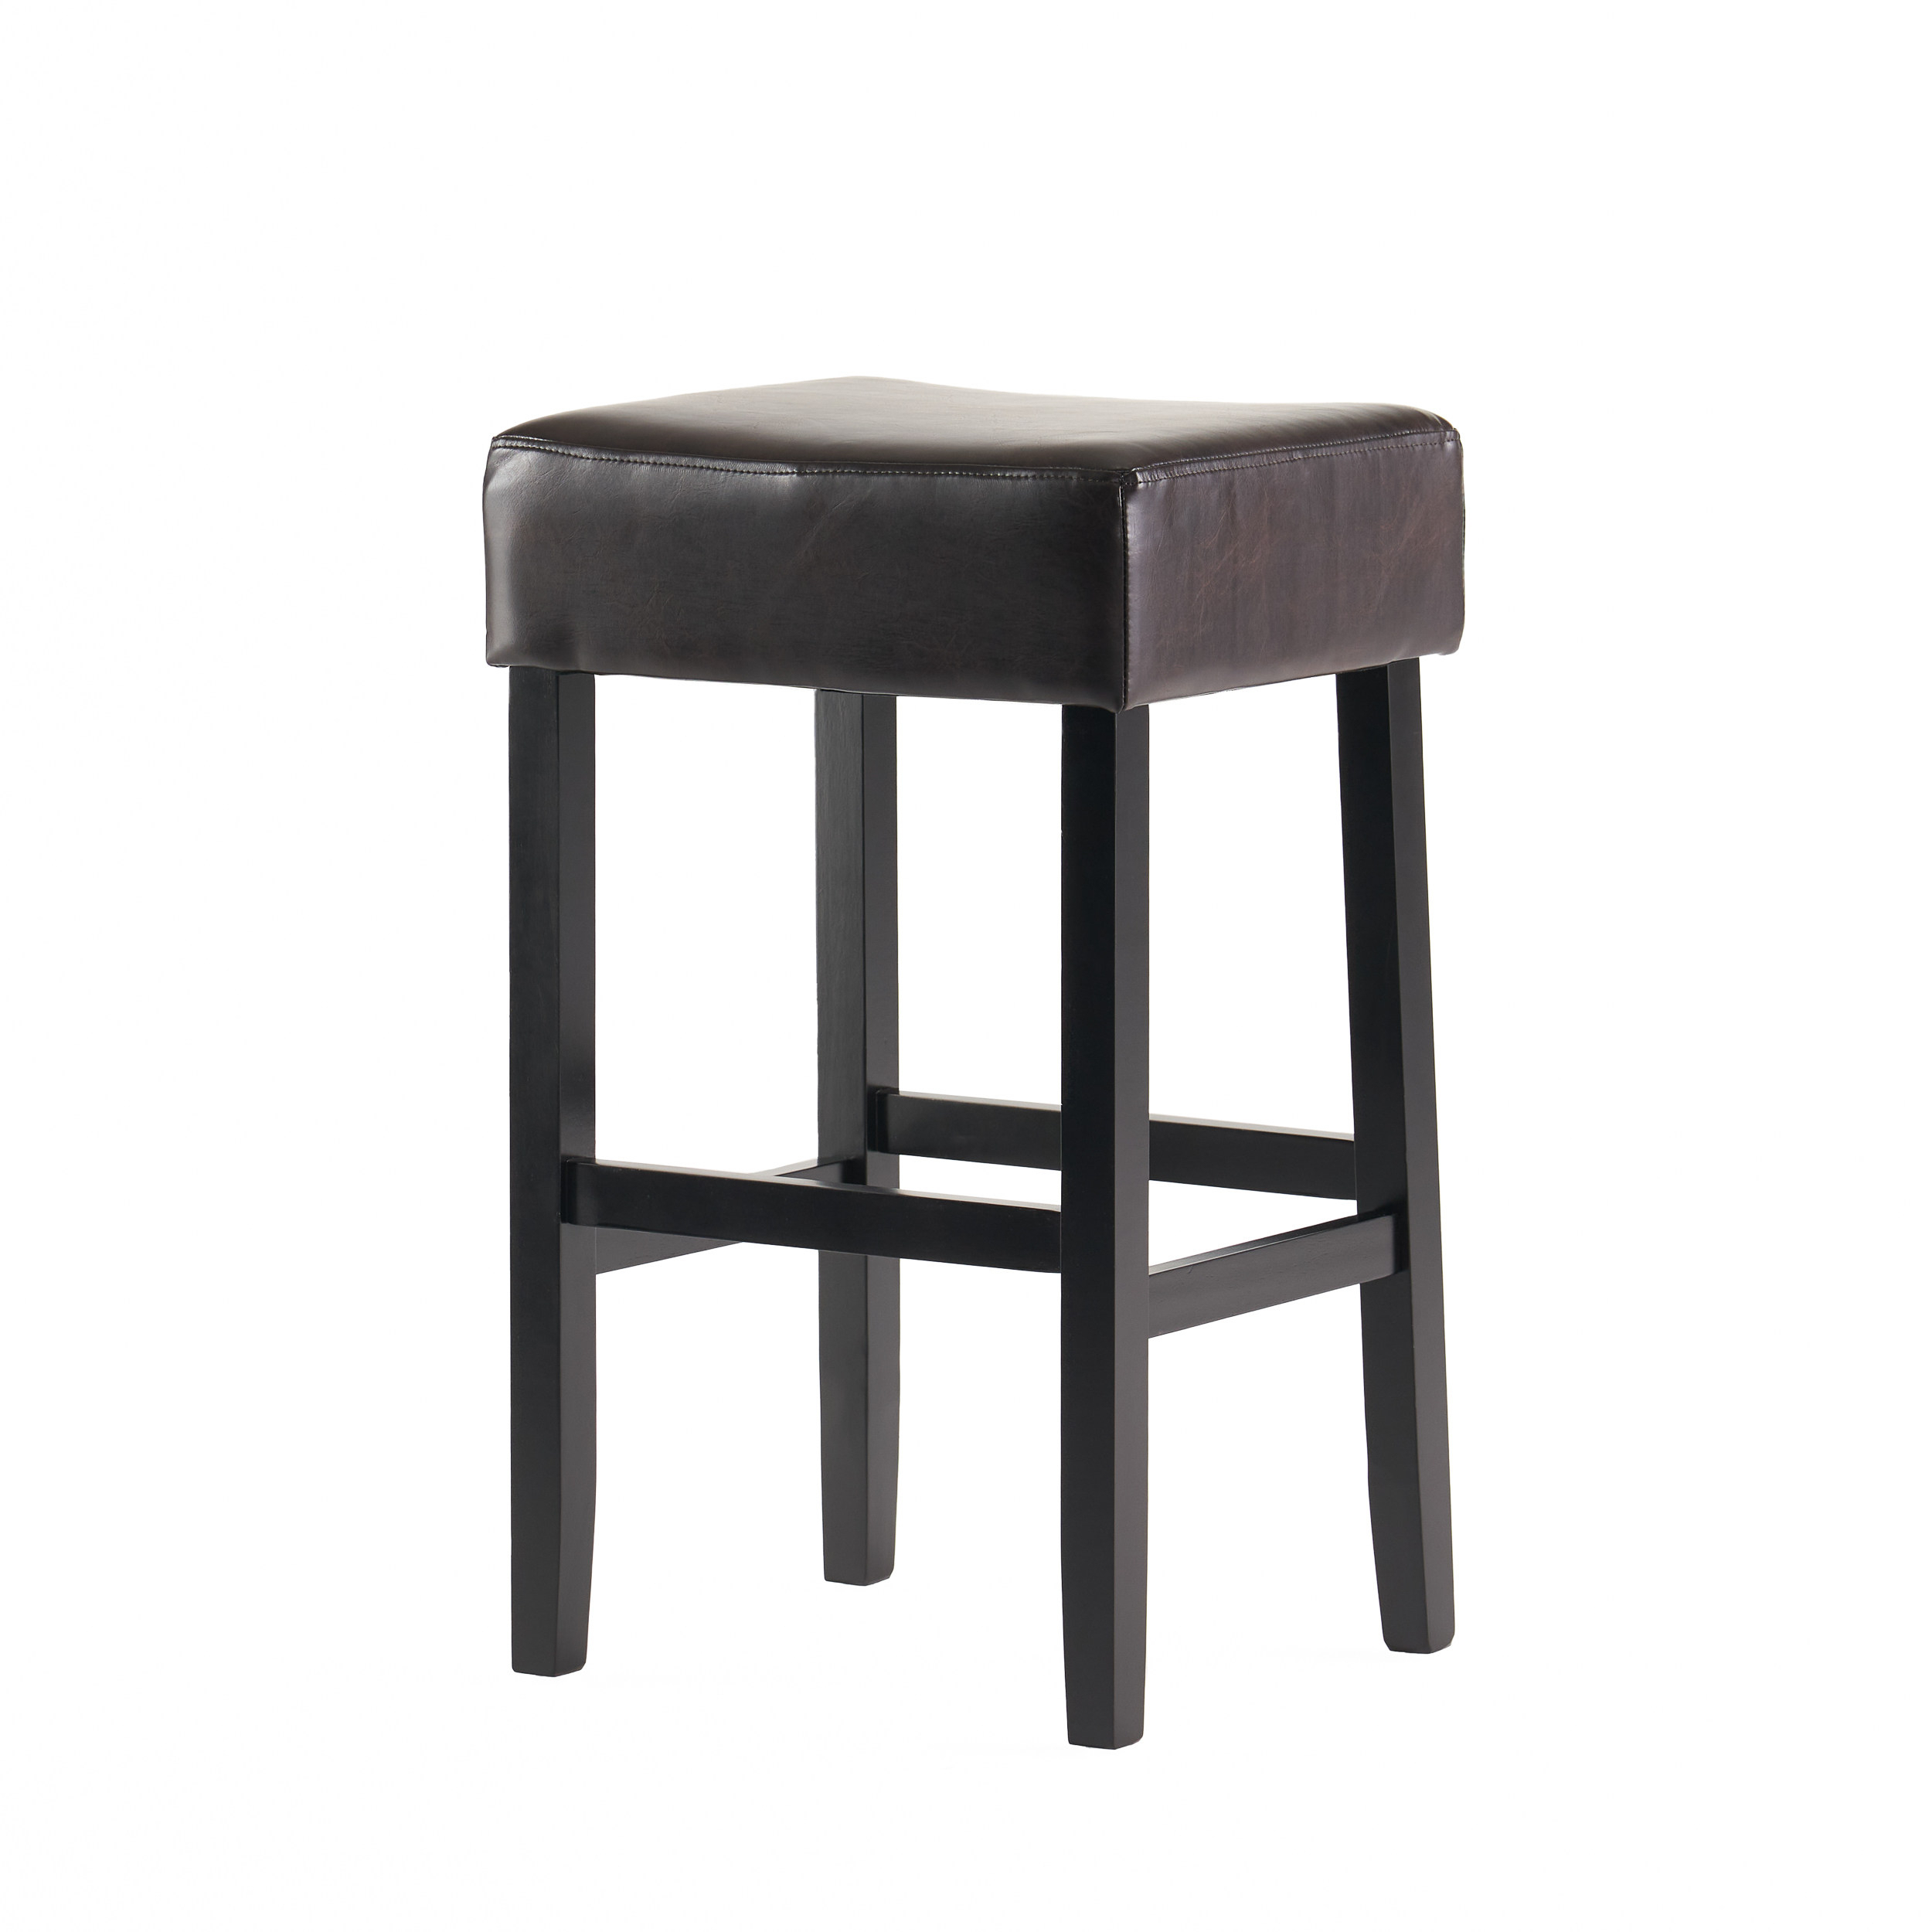 Duff Brown Leather Bar Stool (Set Of 2)